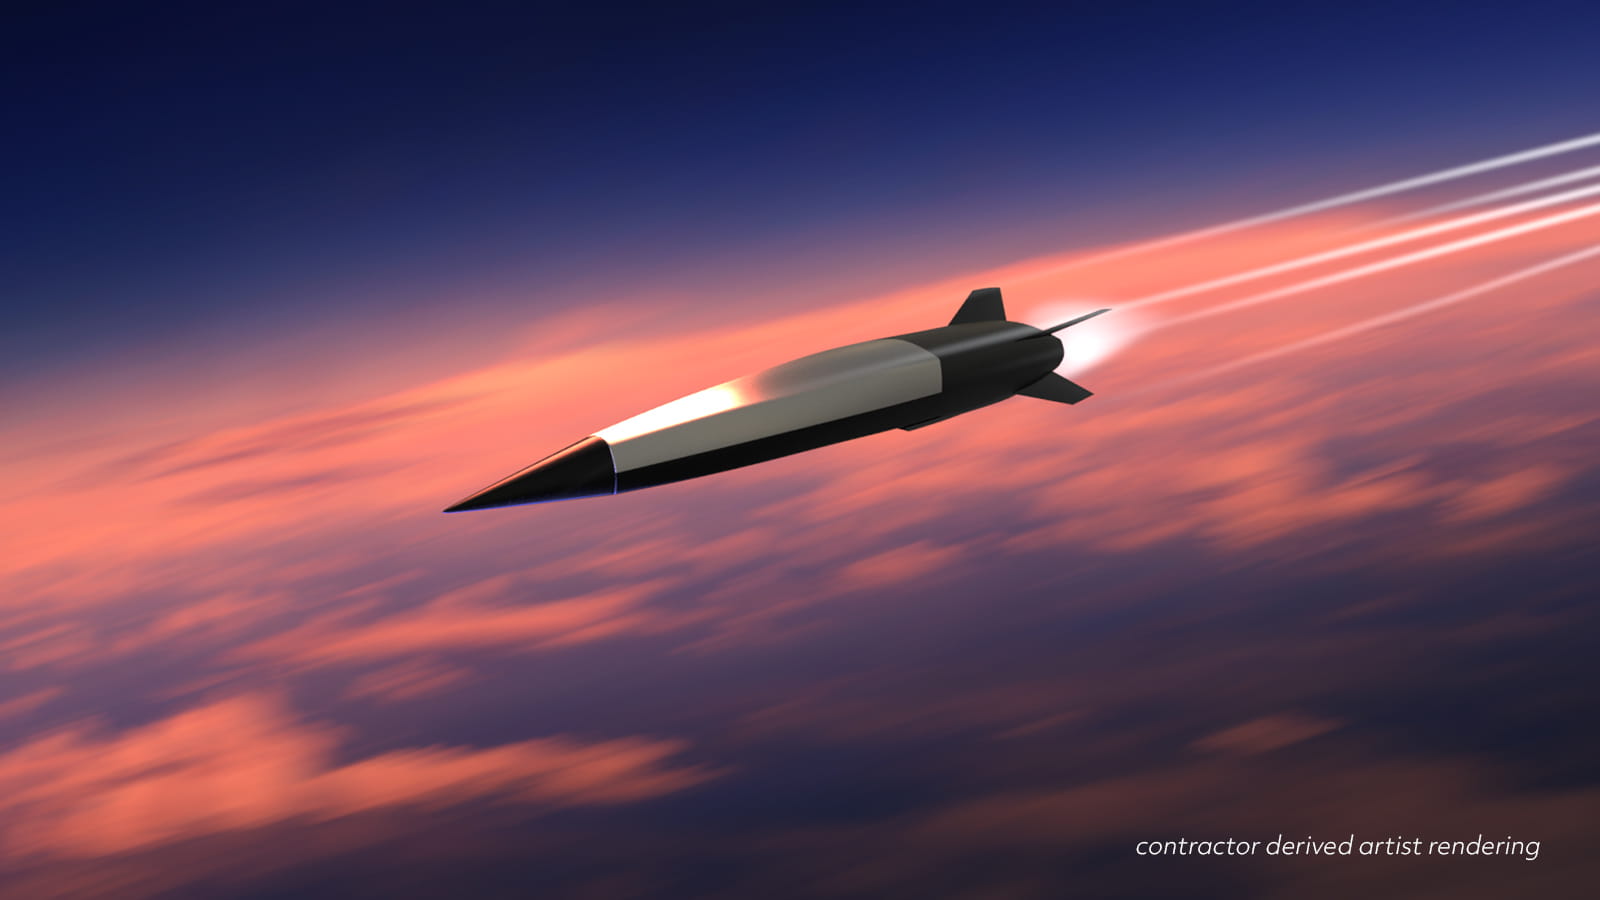 A contractor-derived rendering of the Hypersonic Attack Cruise Missile, or HACM.